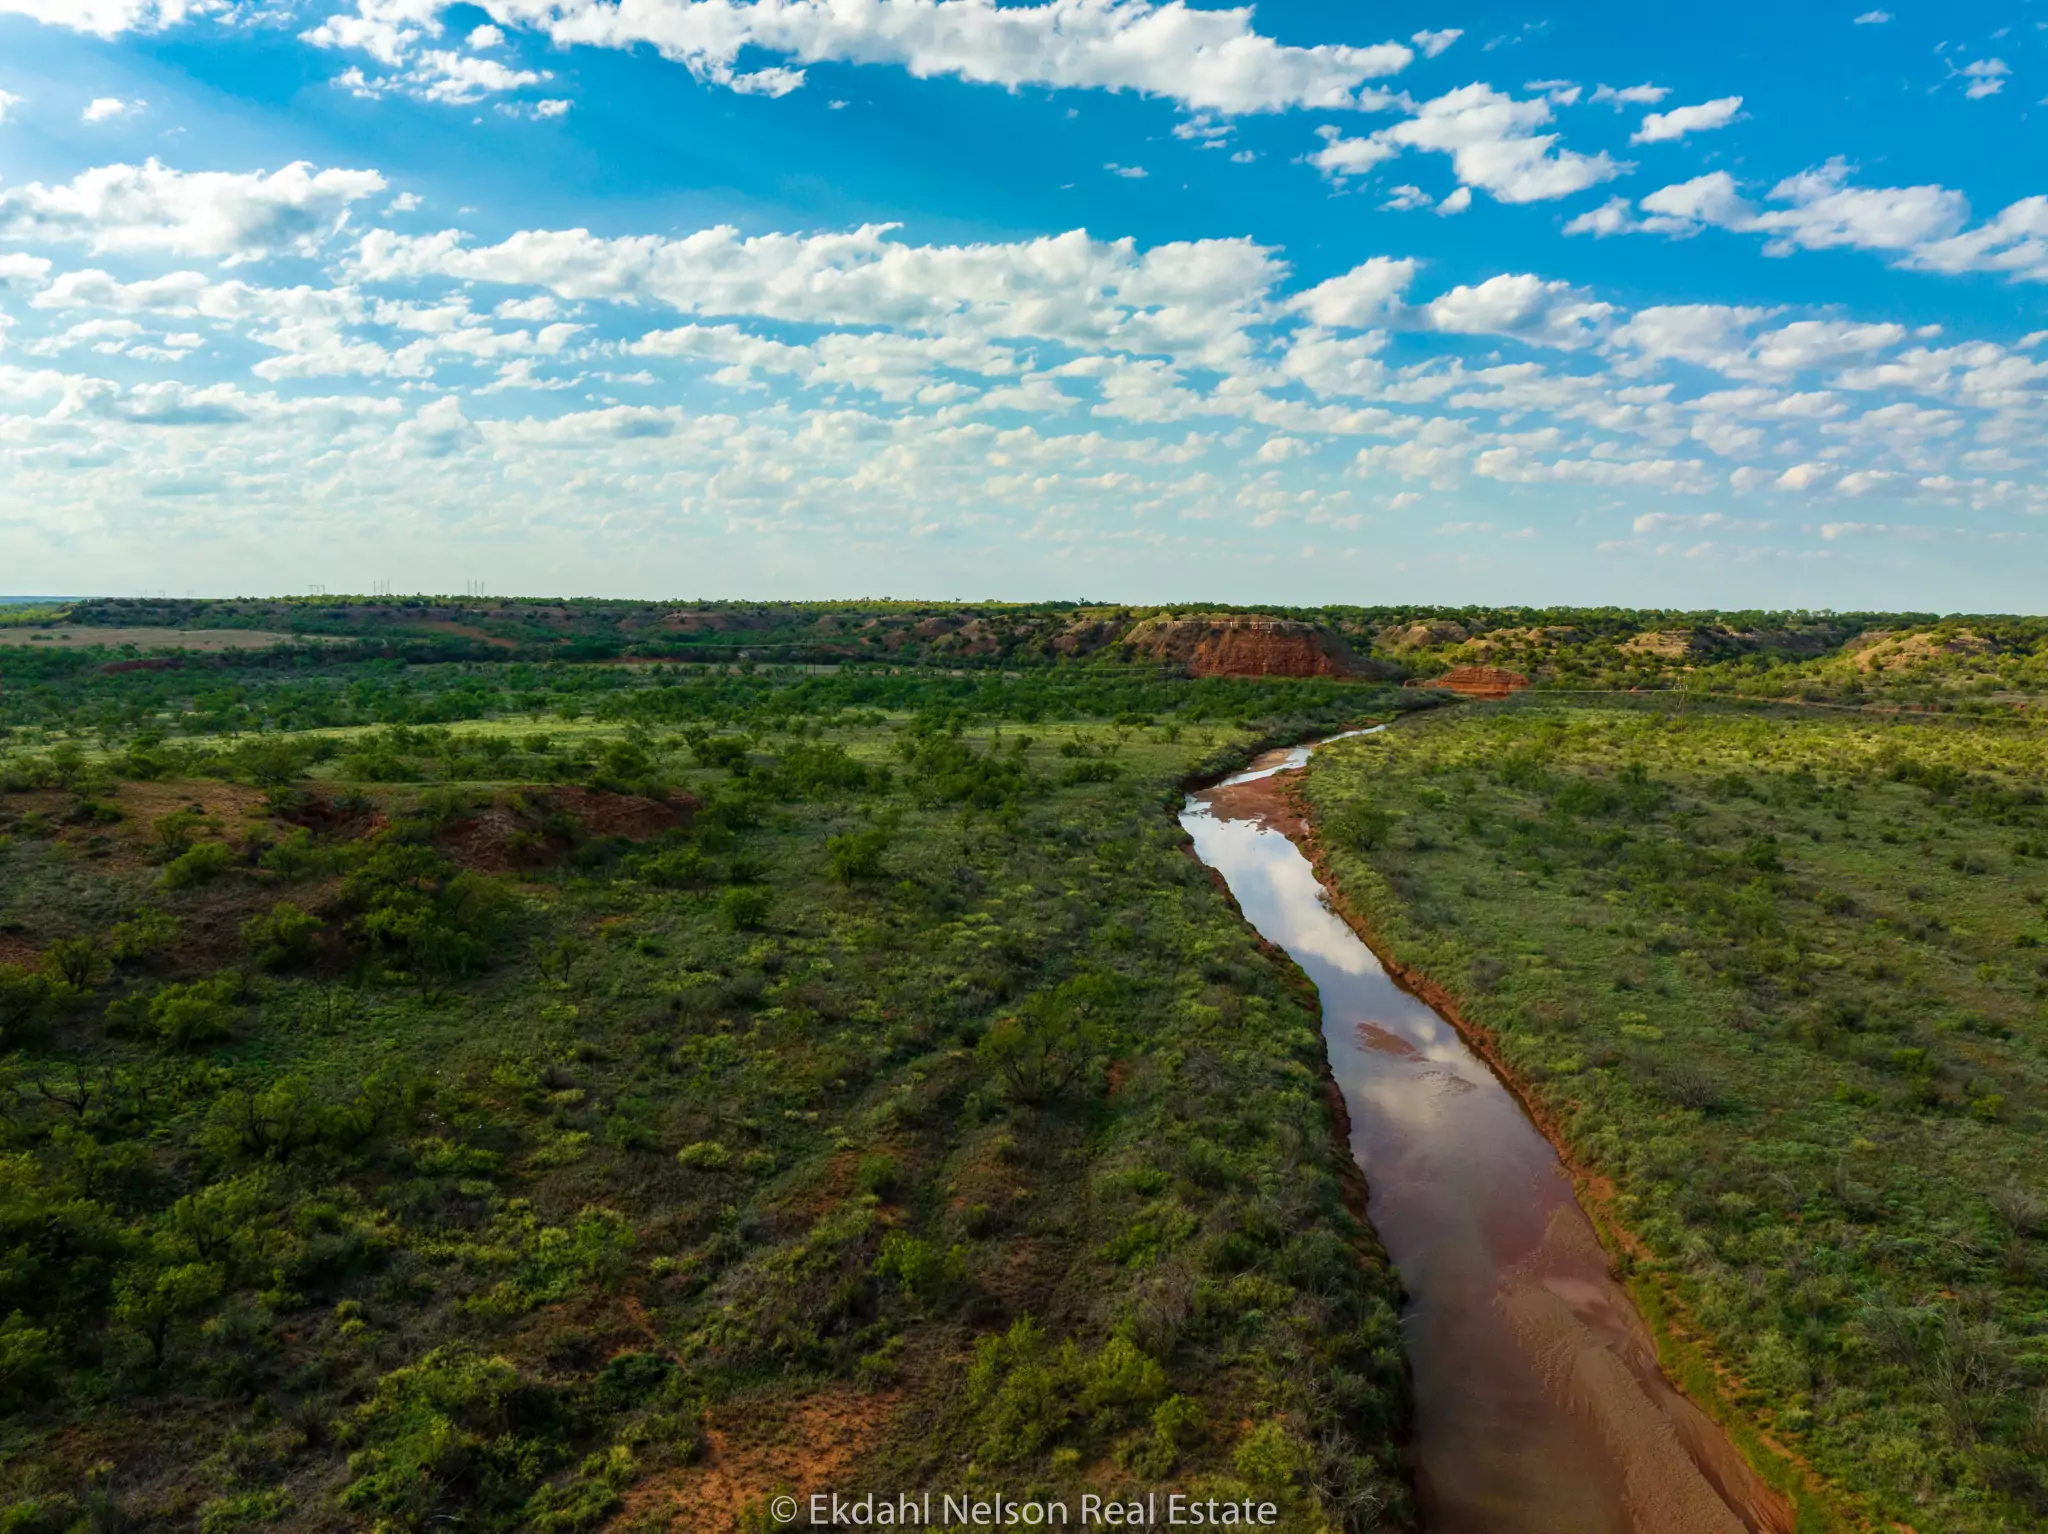 Image of stream to convey hunting Land in Texas - Ekdahl Nelson Real Estate